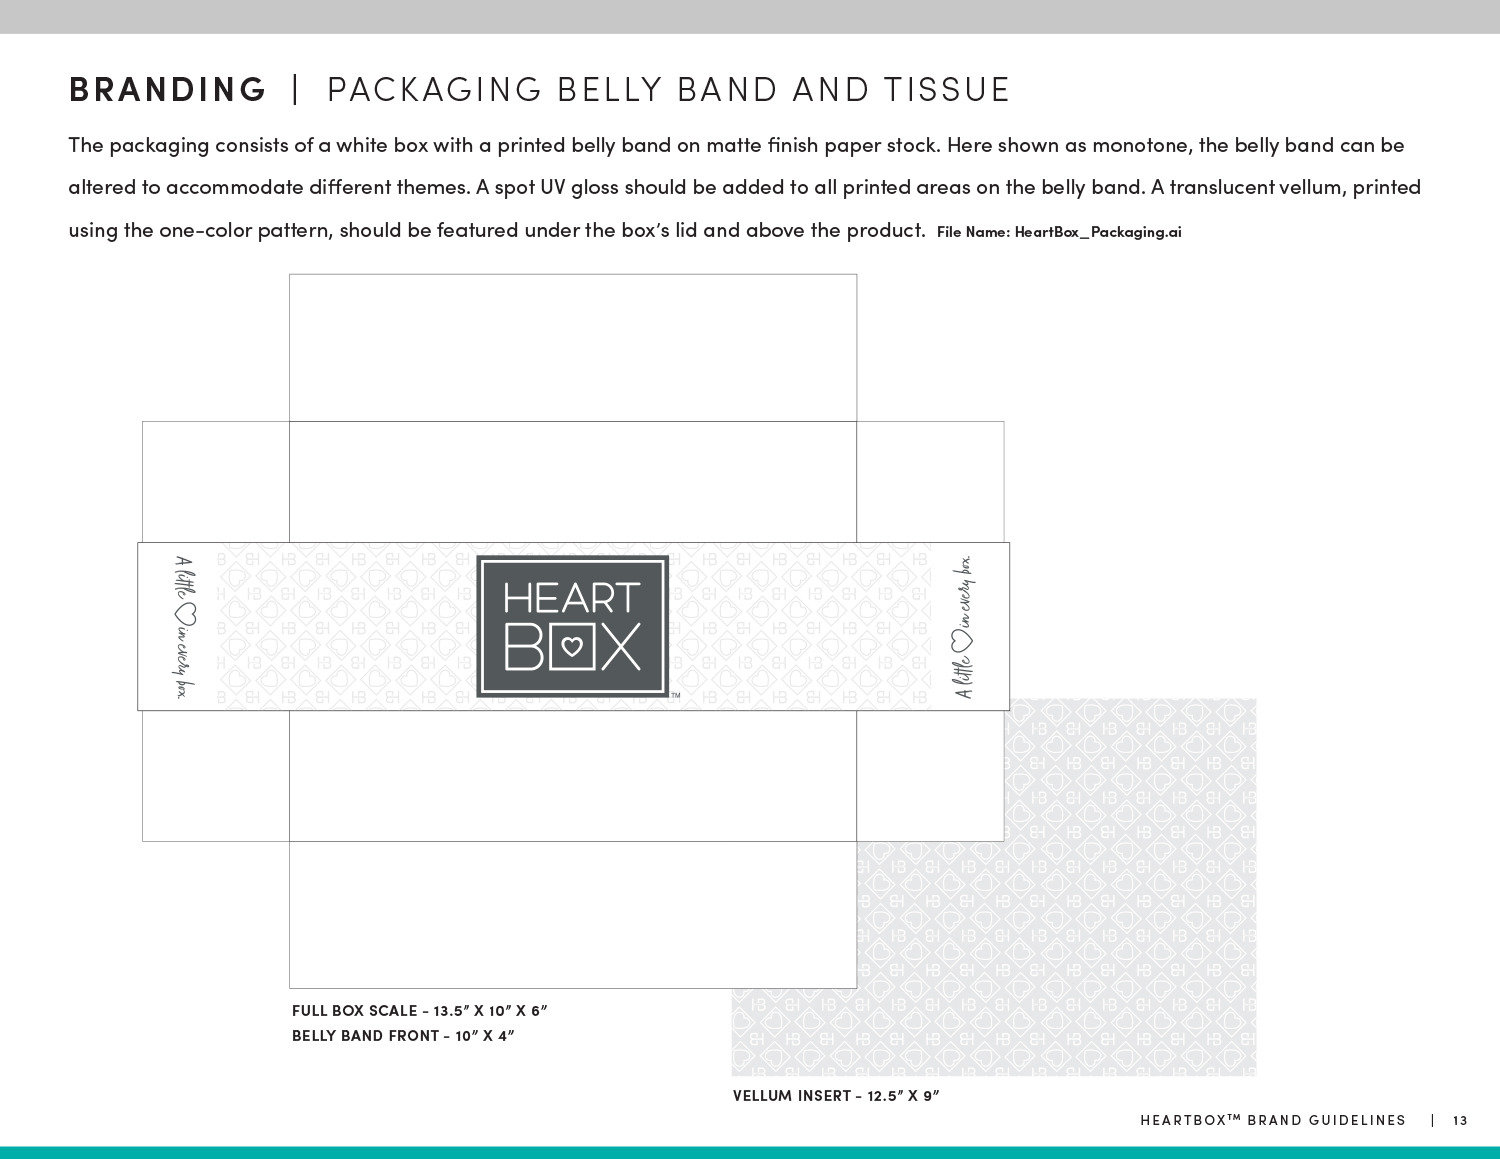 HeartBox Marketing Design Packaging Belly Band and Tissue